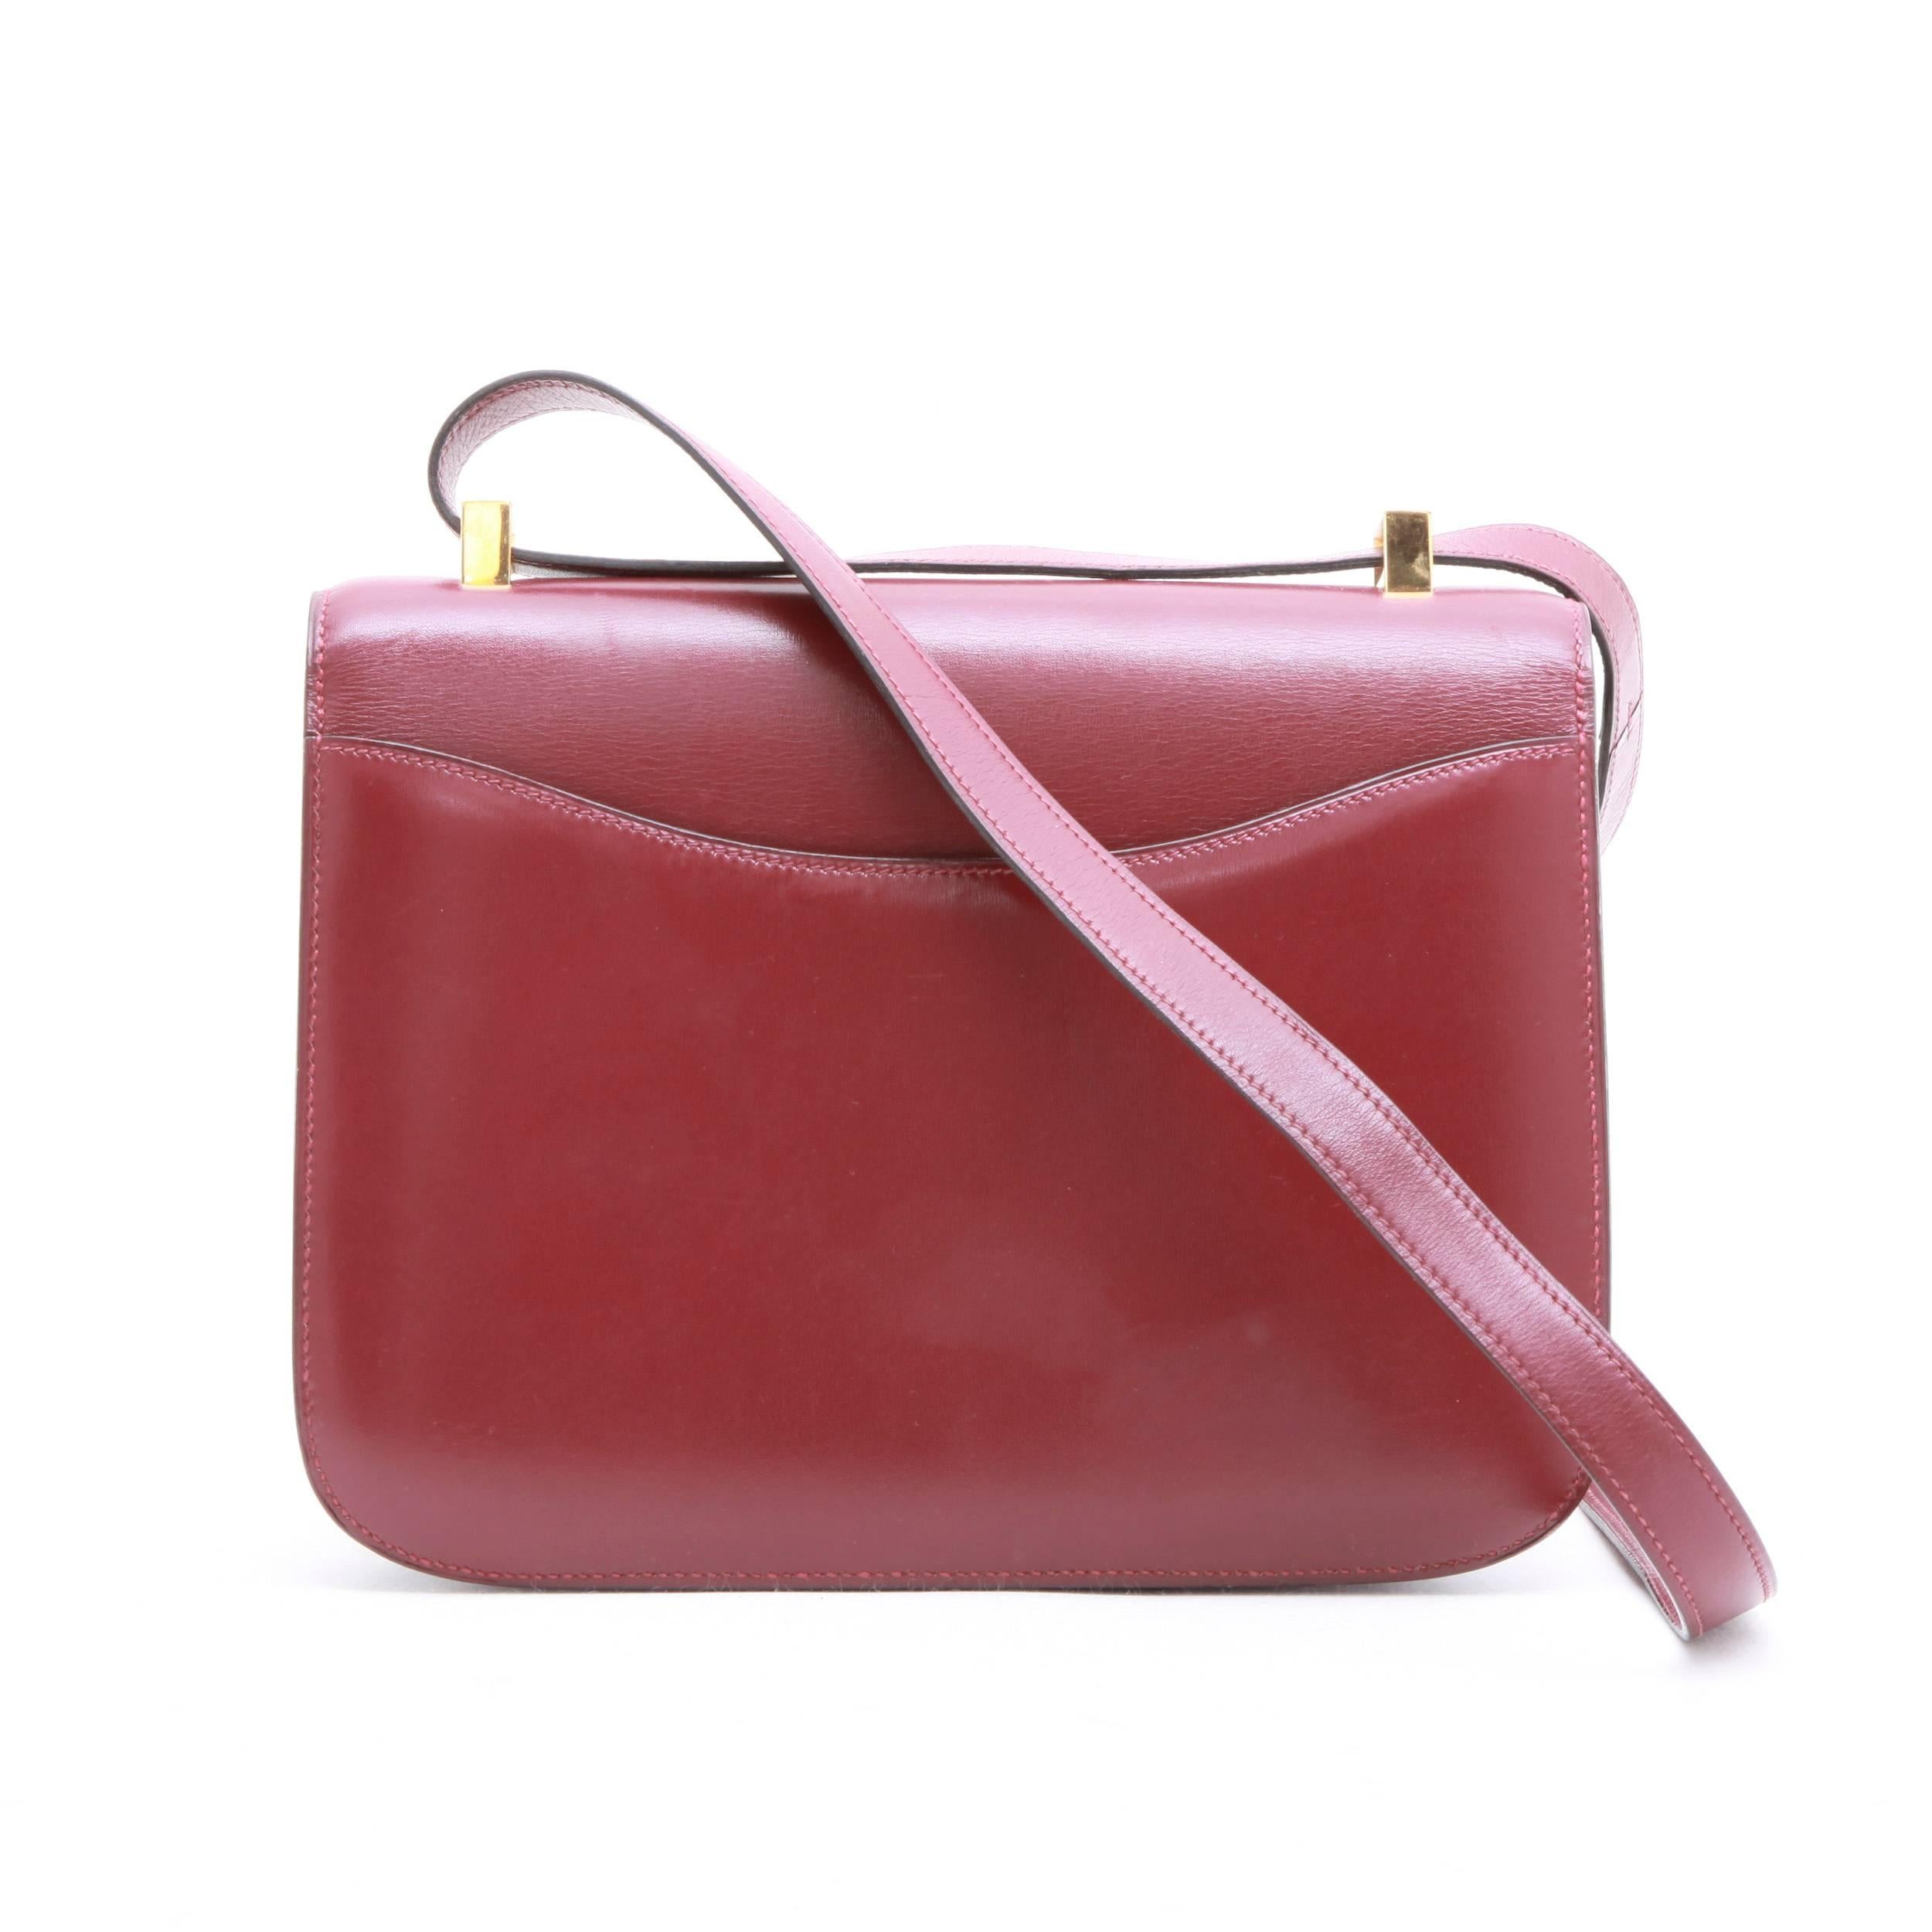 Hermes vintage 'Constance' bag in red H box leather. Gilded metal hardware. Stamp O in a round Year 1985. 

Worn shoulder. 

Dimensions : handle: 78 cm

Will be delivered in a dust bag and a Hermes box